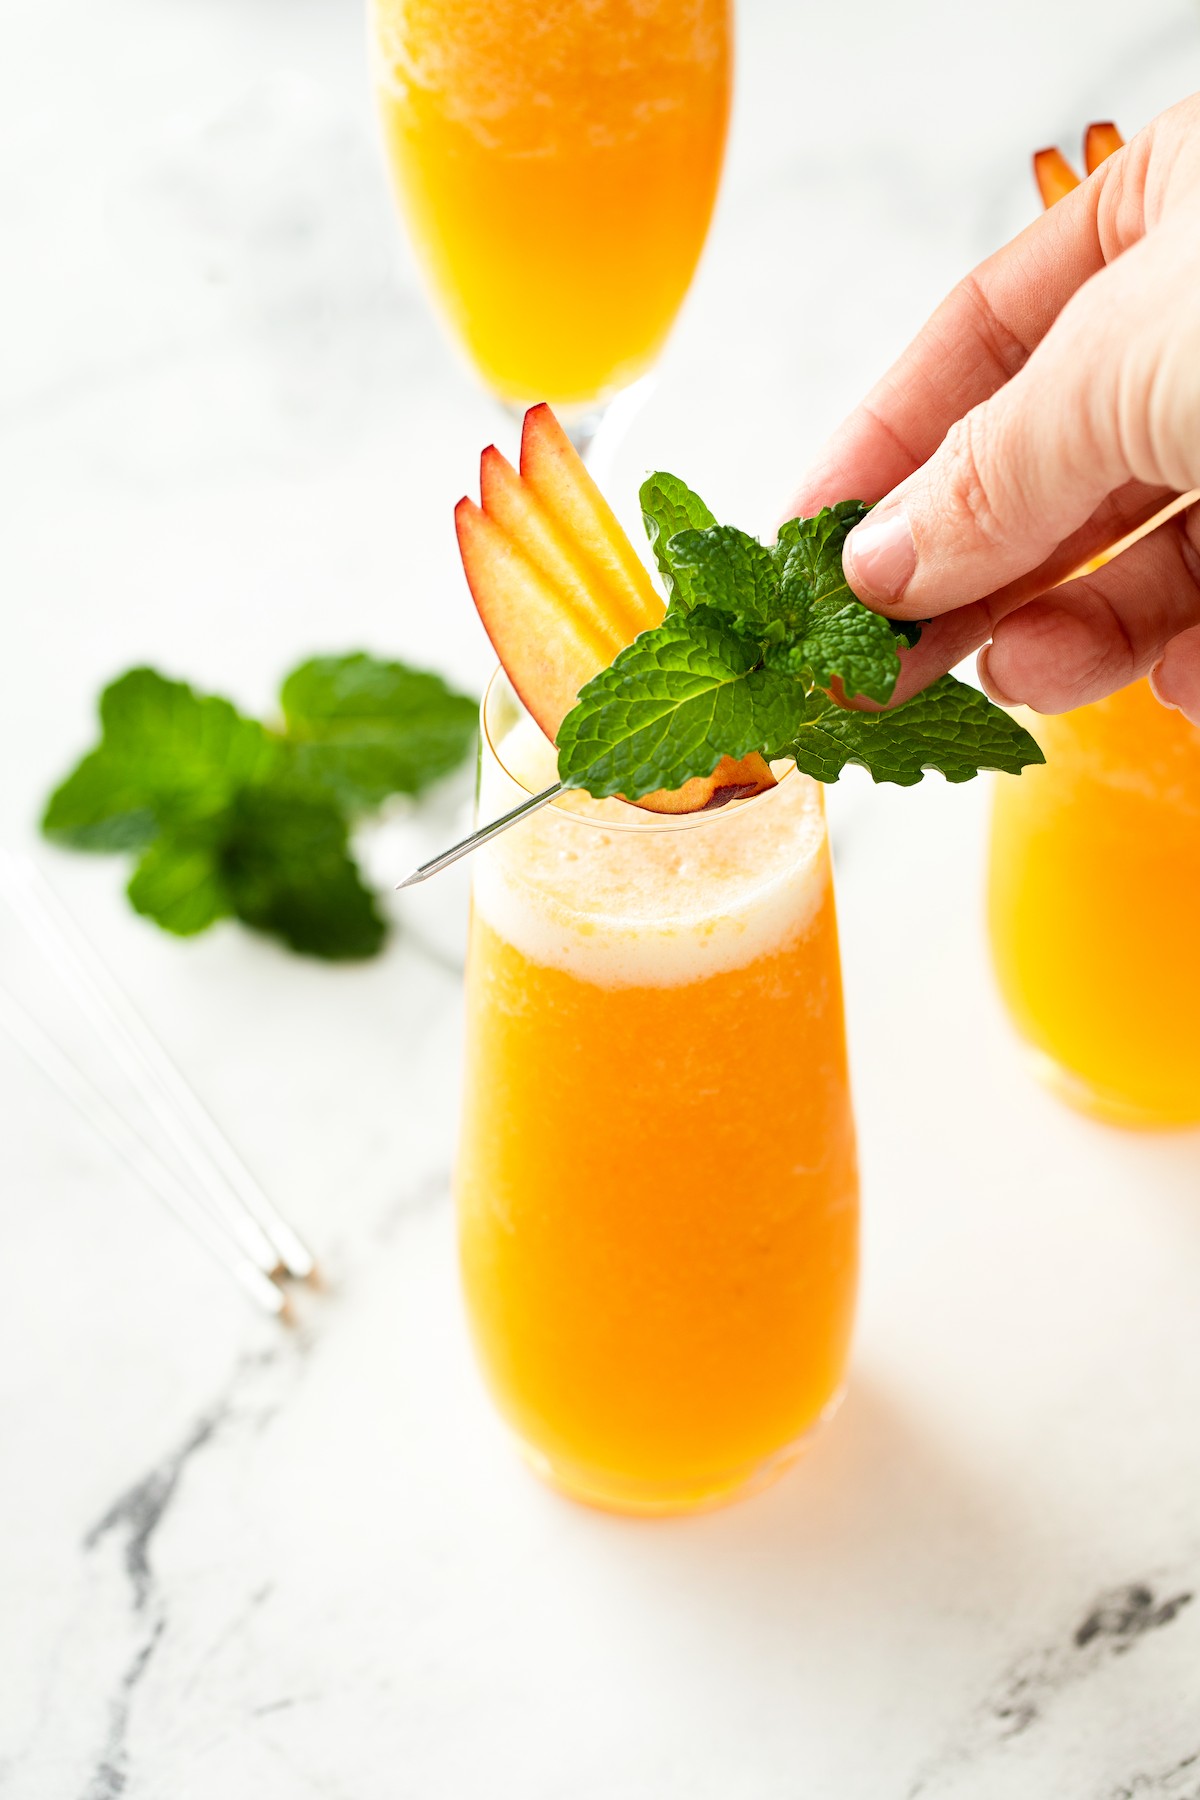 Garnishing a drink with thin slices of peach and a sprig of mint.